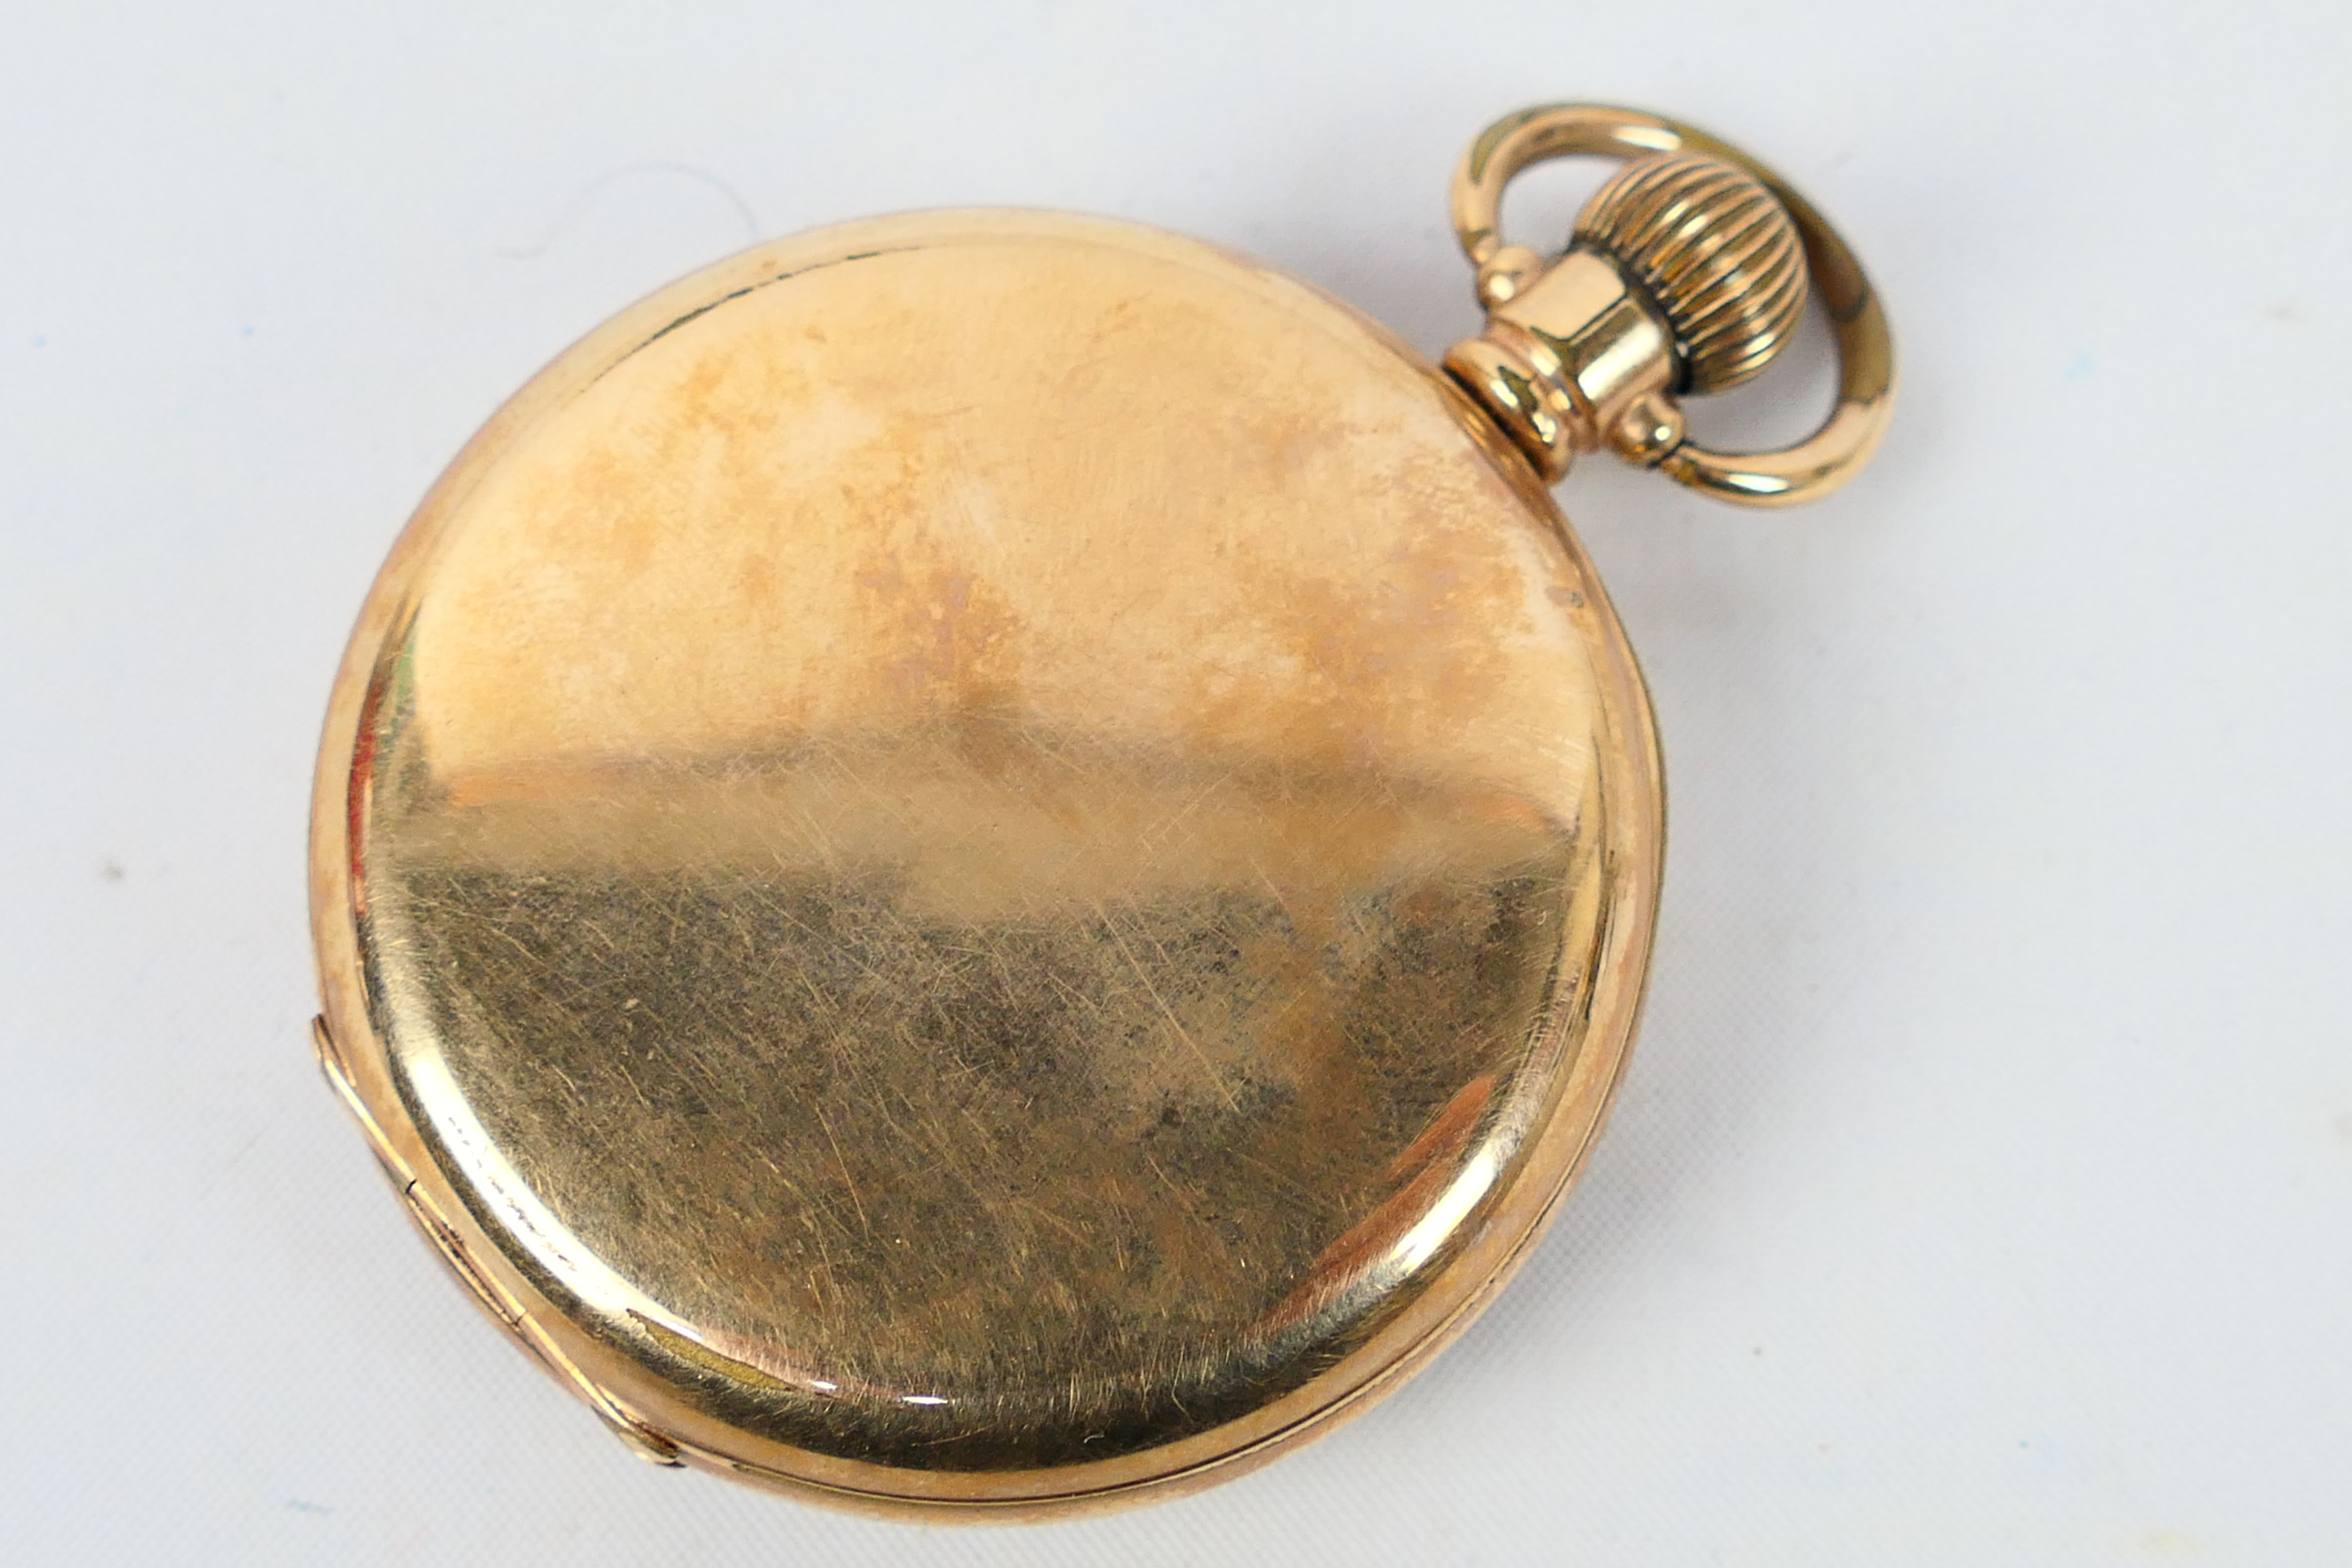 A gold plated open face pocket watch, white enamel dial with Arabic numerals, - Image 4 of 7